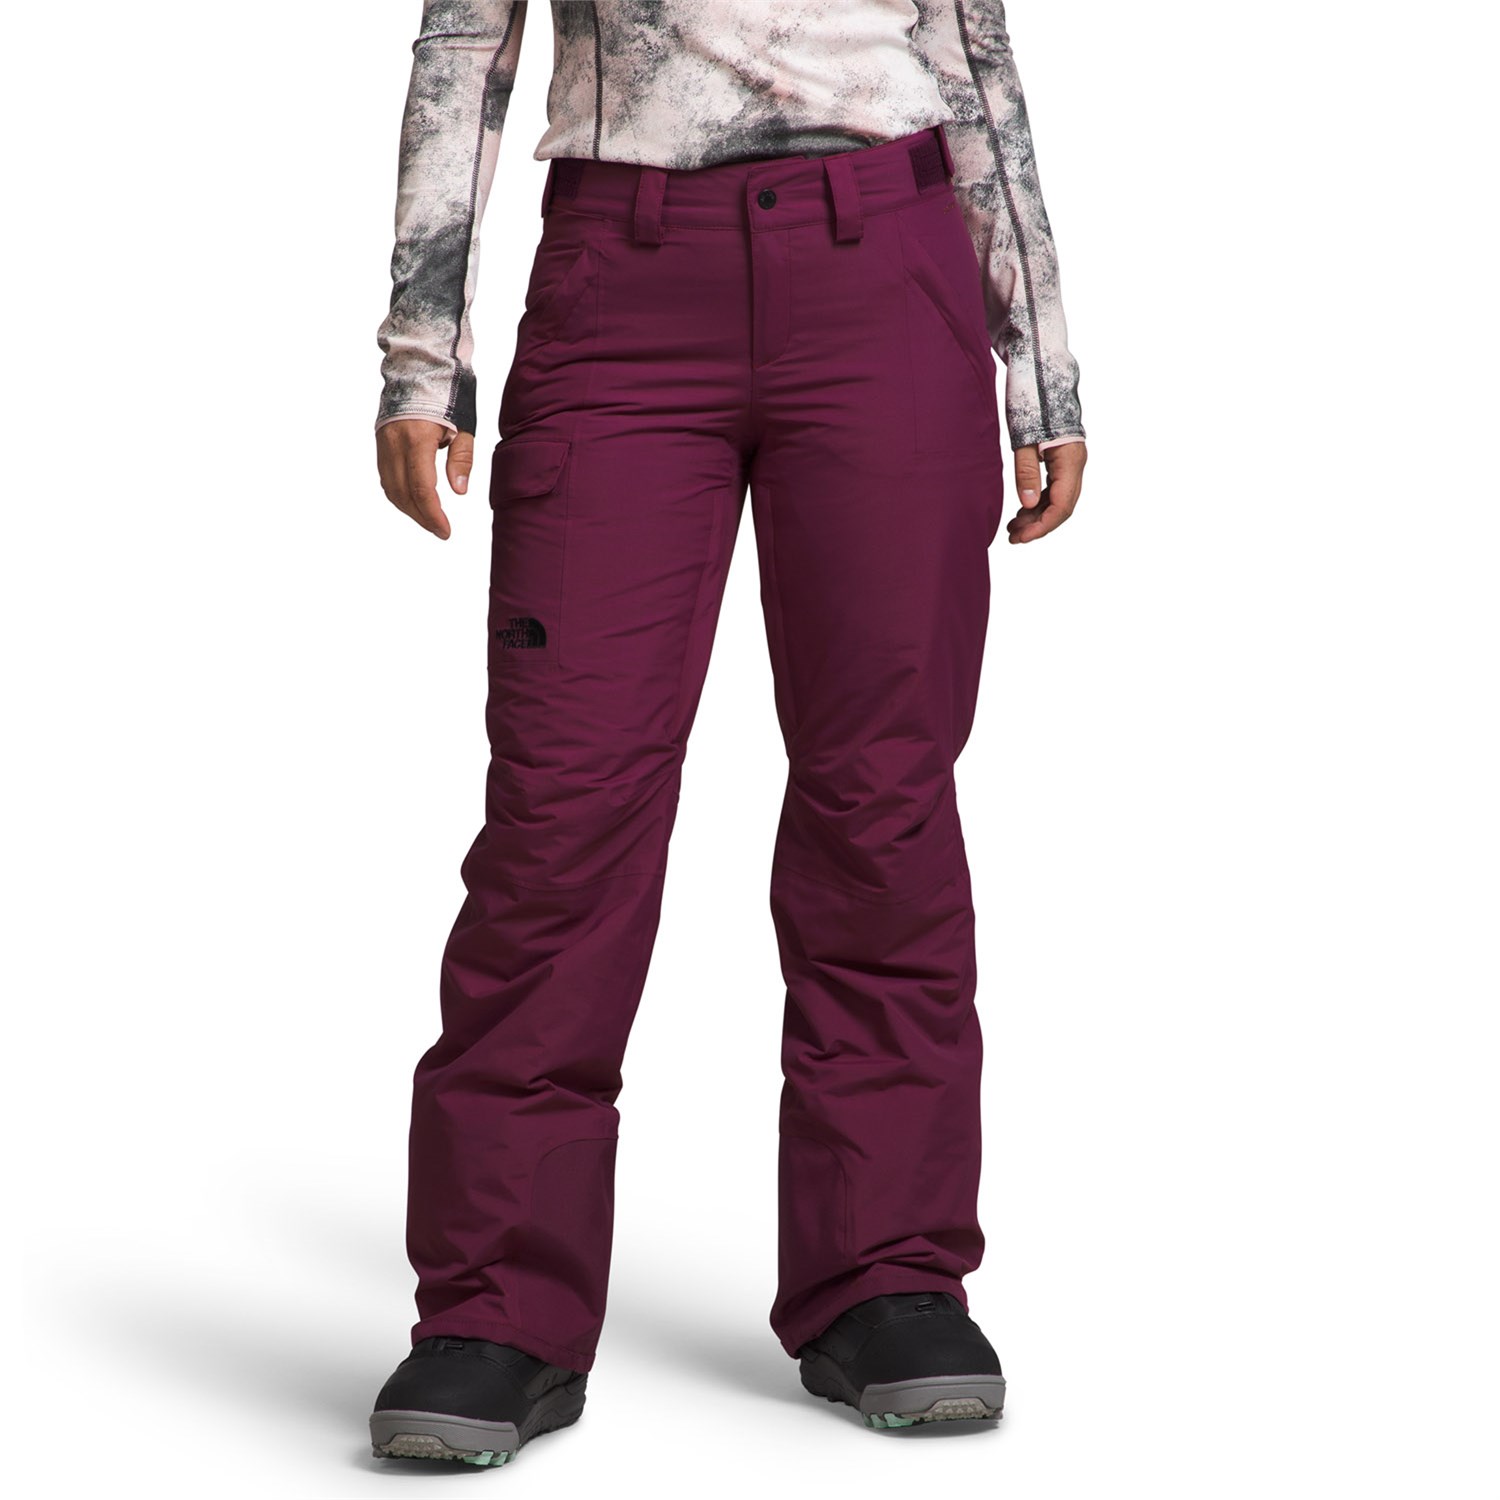 Брюки The North Face Freedom Insulated, цвет Boysenberry брюки the north face freedom insulated plus short цвет boysenberry